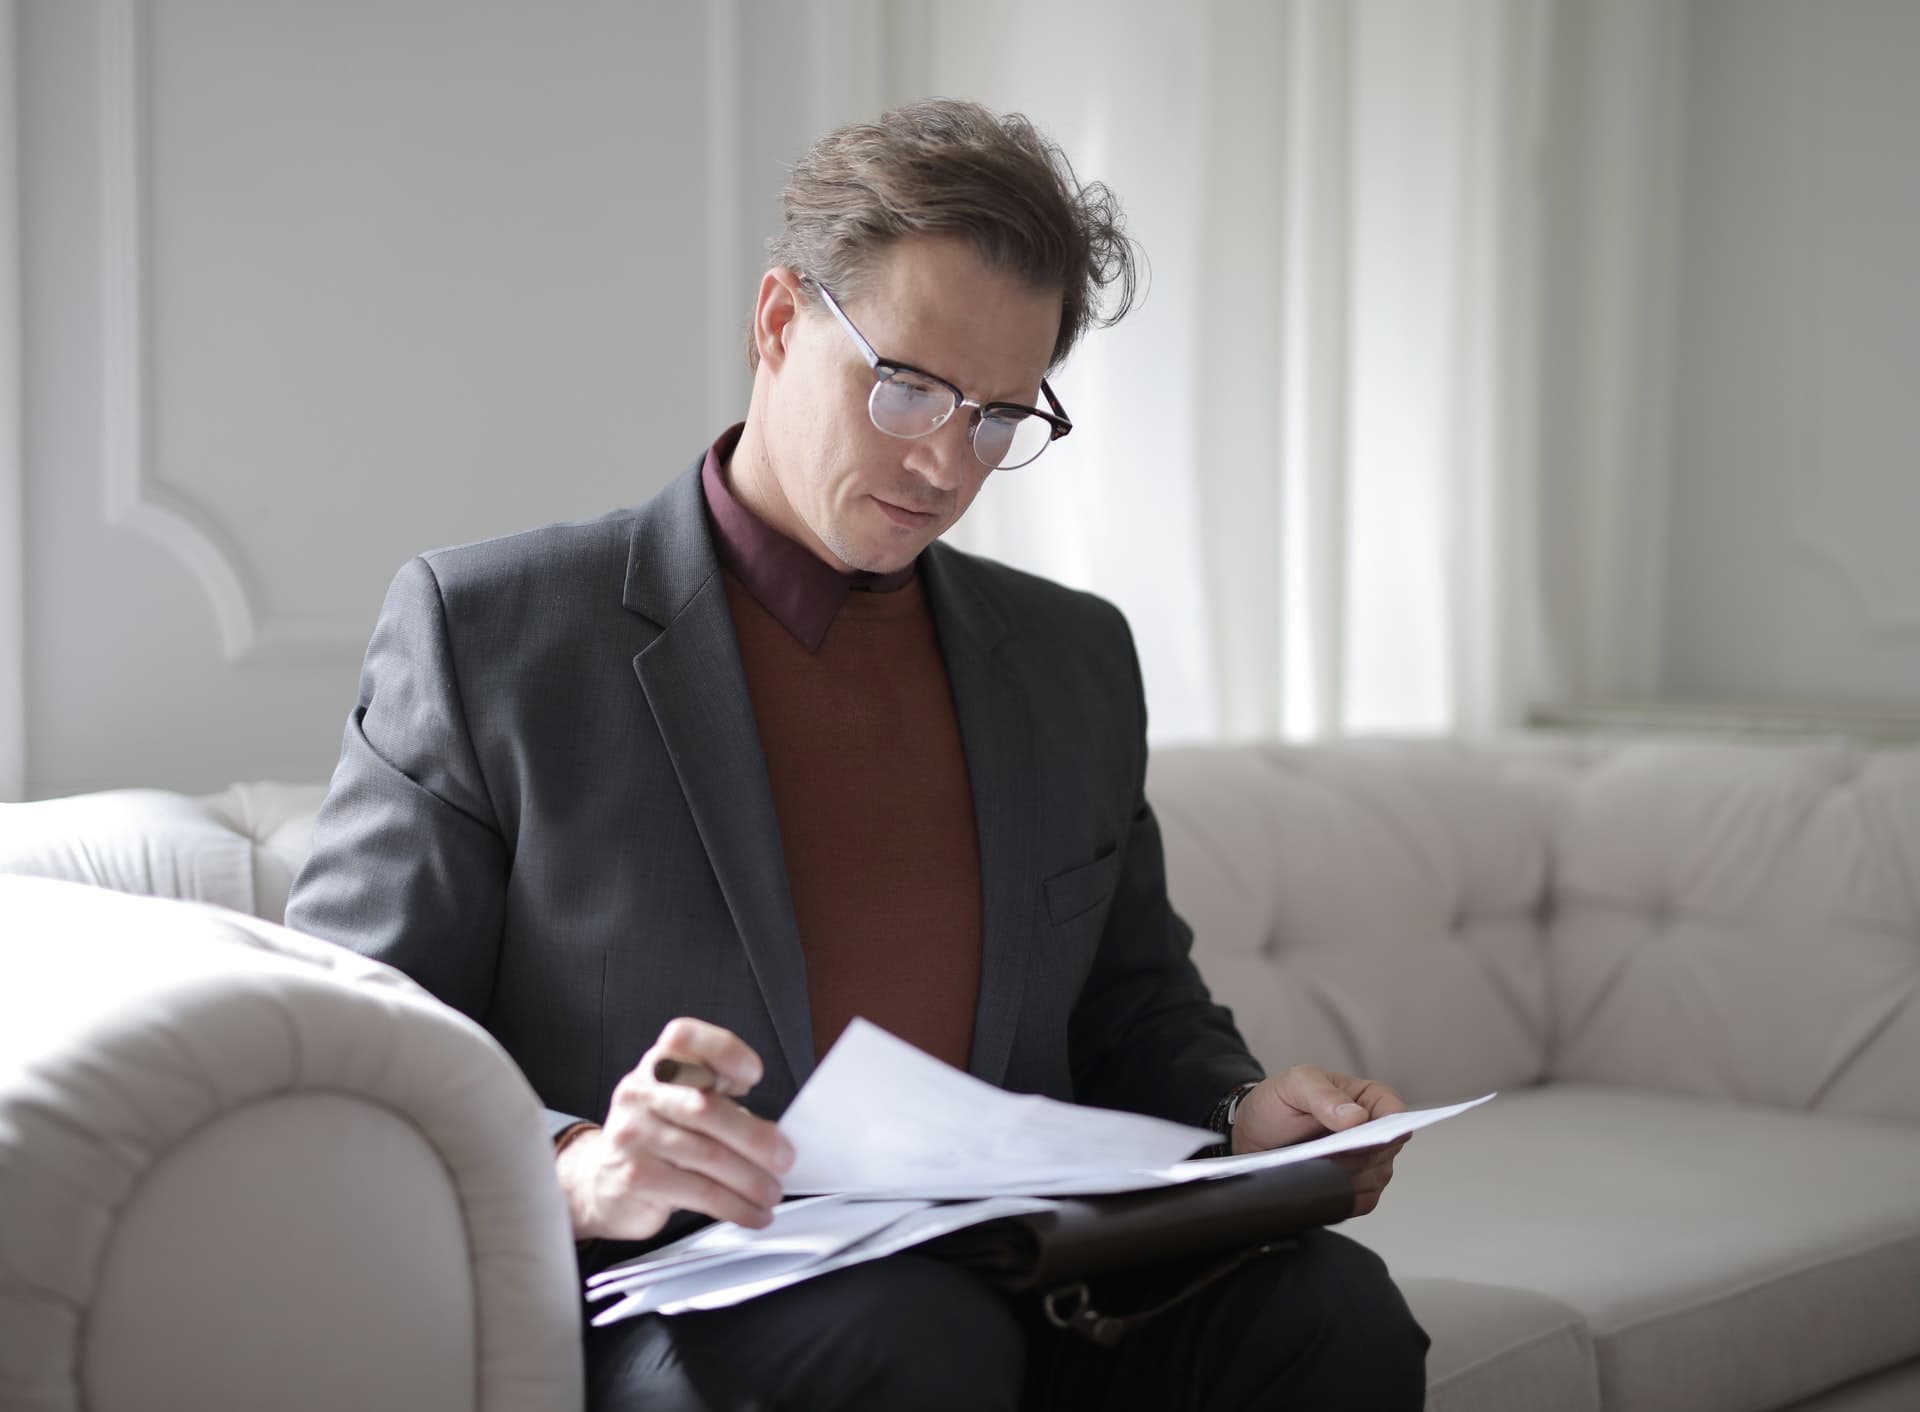 A well dressed man wearing glasses paging through documents that are placed in his lap.